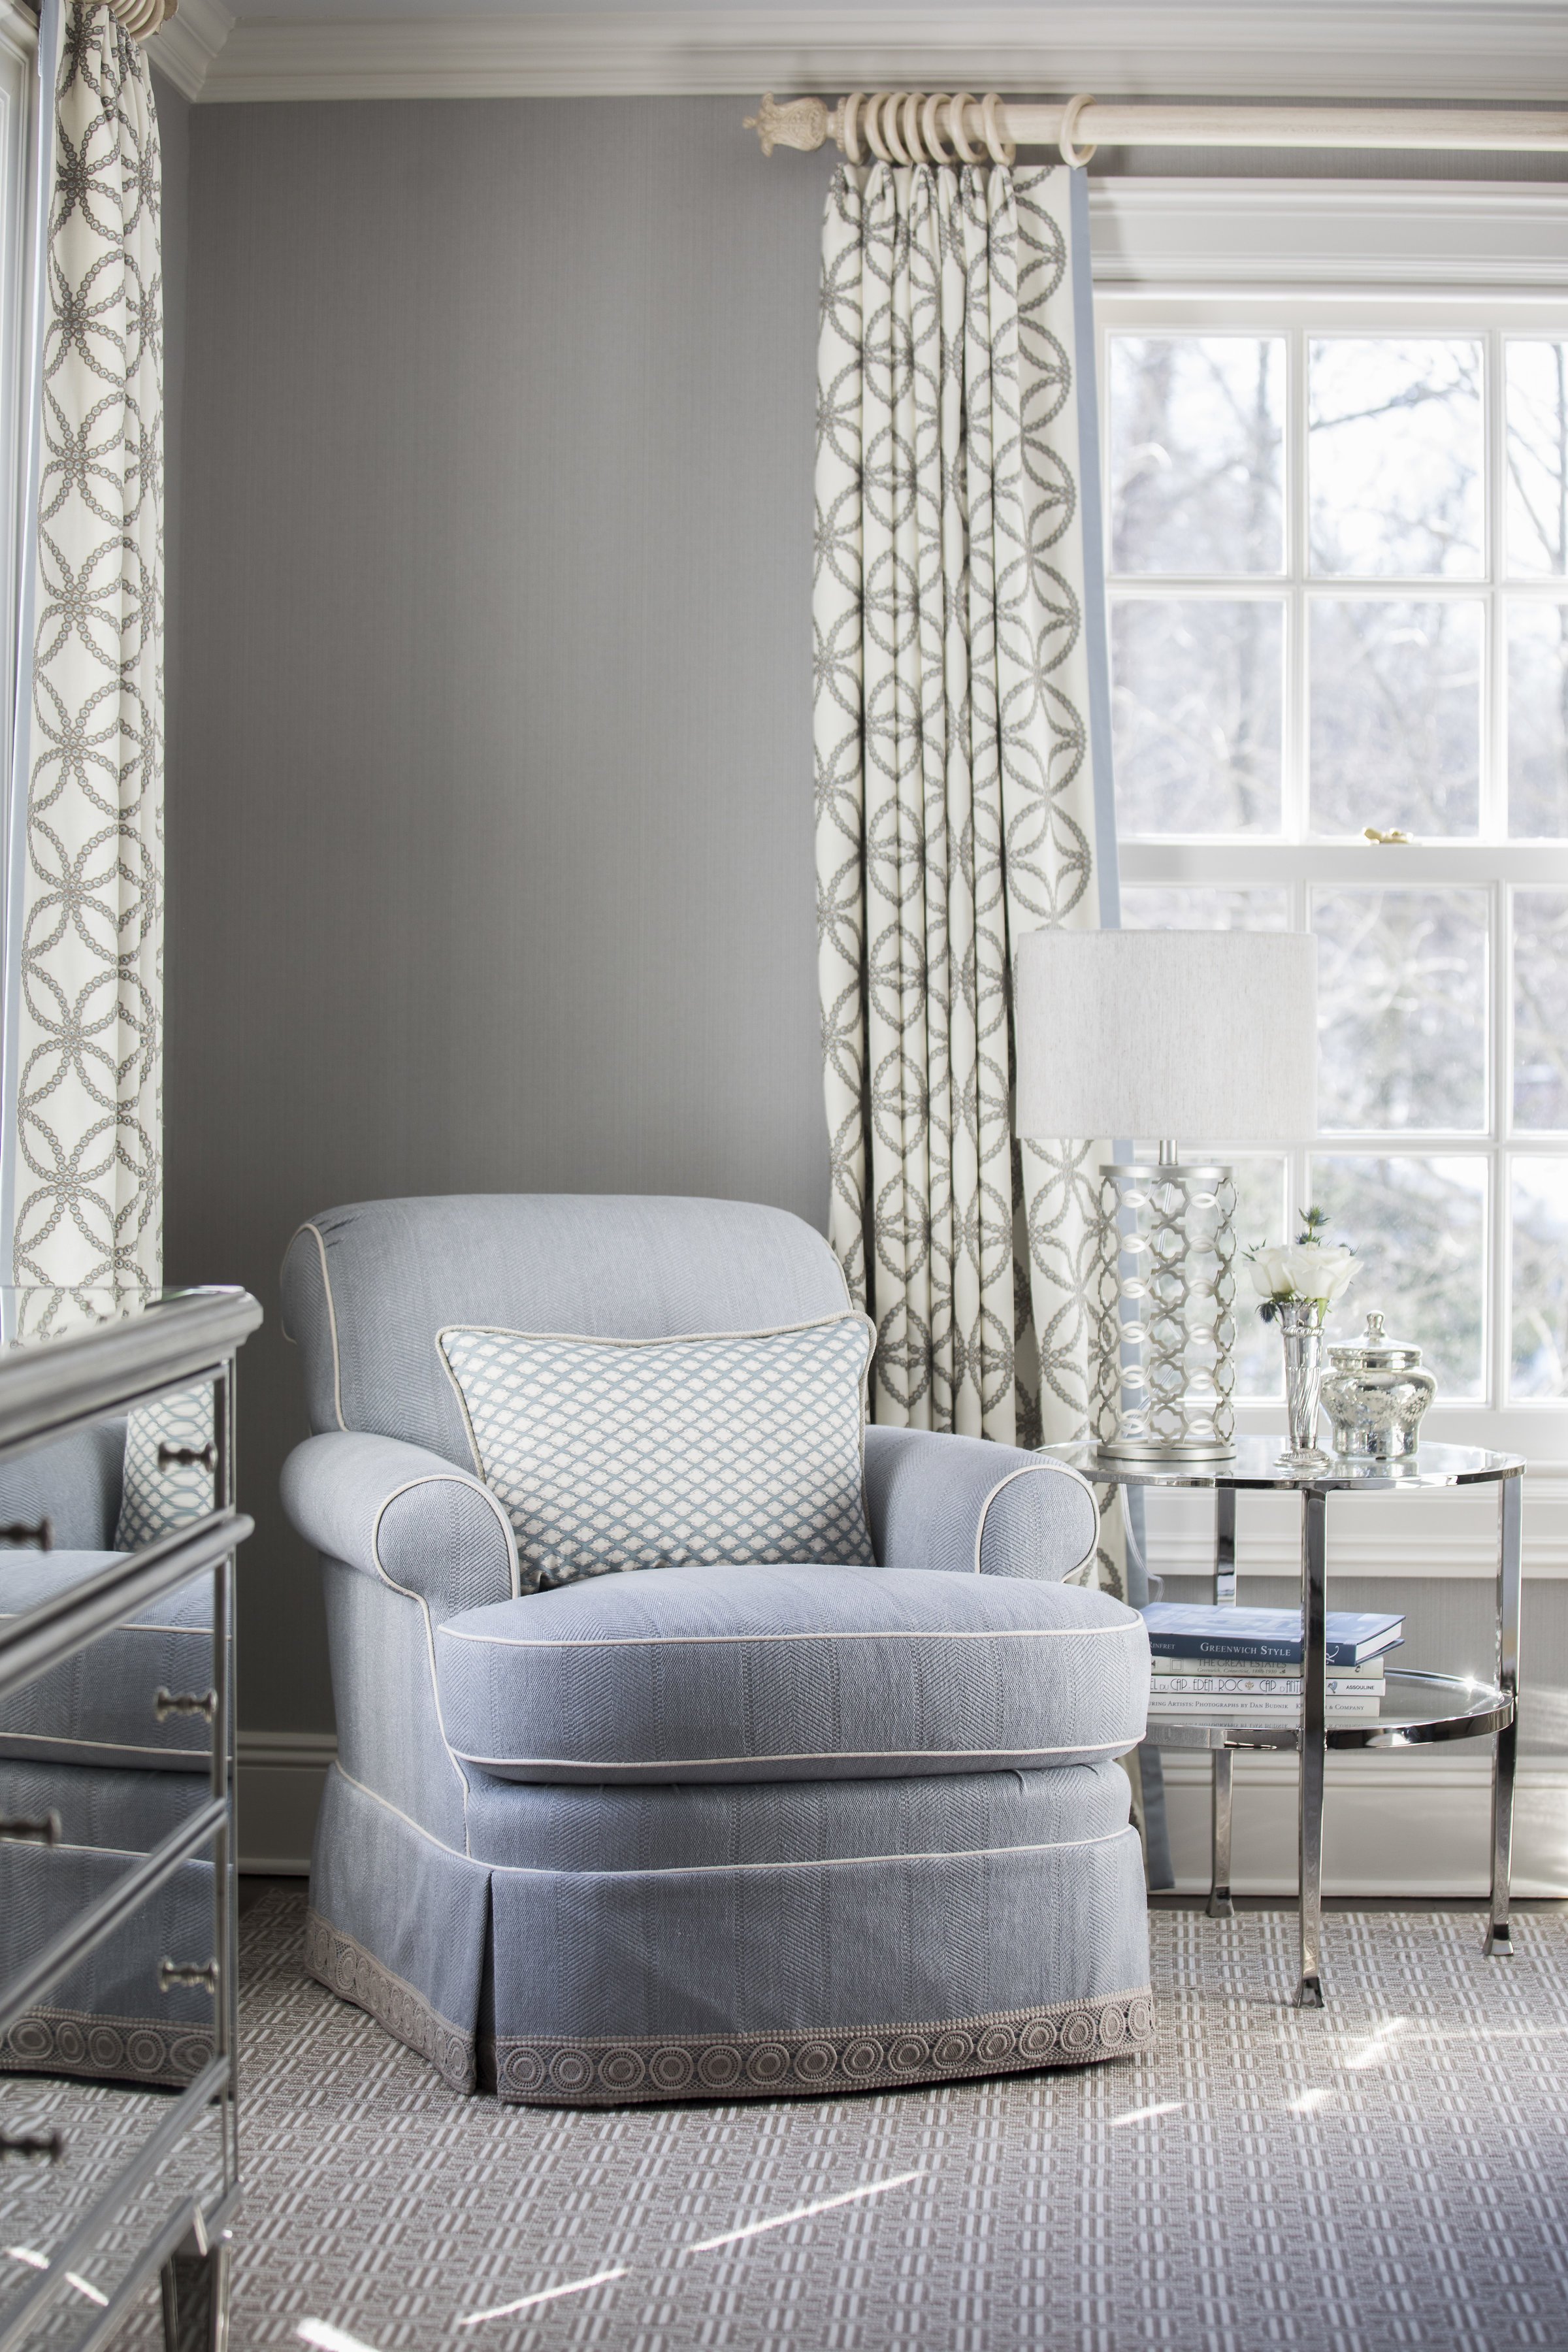 67-chair-blue-gray-drapes-pattern-rinfret-neoclassical-greenwich-connecticut.JPG